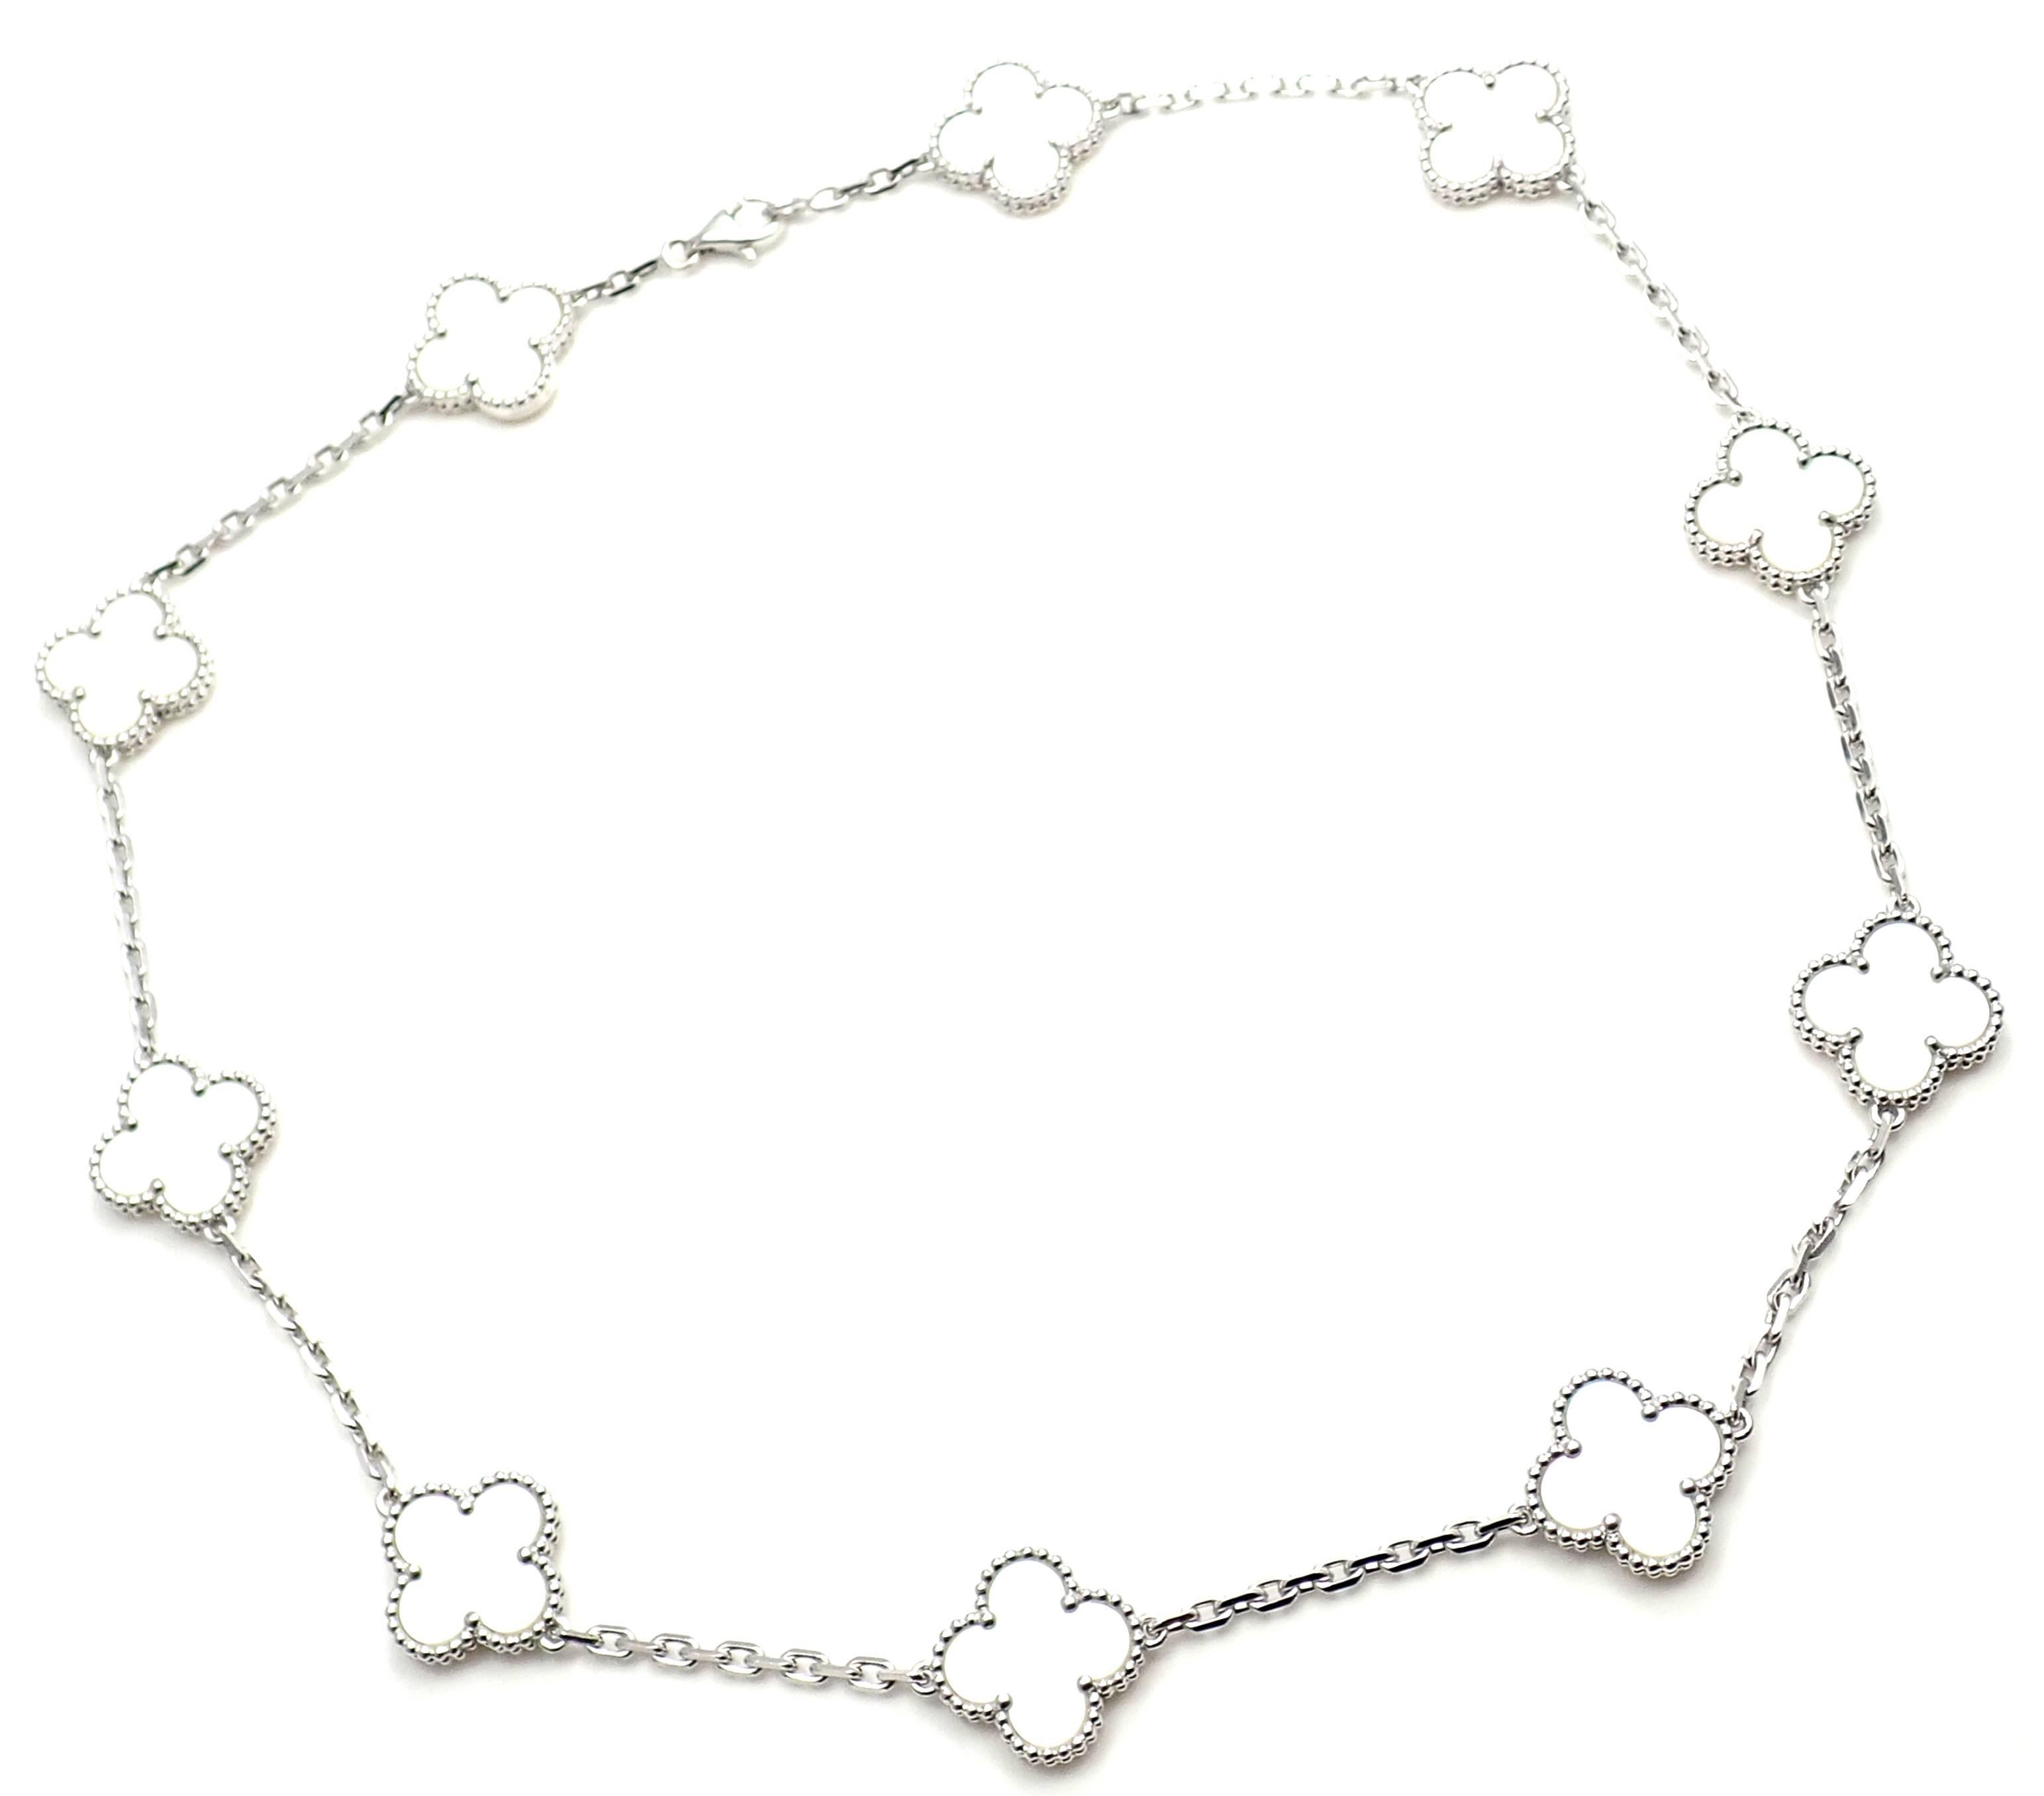 18k White Gold Alhambra 10 Motifs Mother Of Pearl Necklace by Van Cleef & Arpels. 
With 10 motifs of mother of pearl Alhambra stones 15mm each.  
**** This necklace comes with Van Cleef & Arpels service paper from Japanese store.
Details: 
Length: